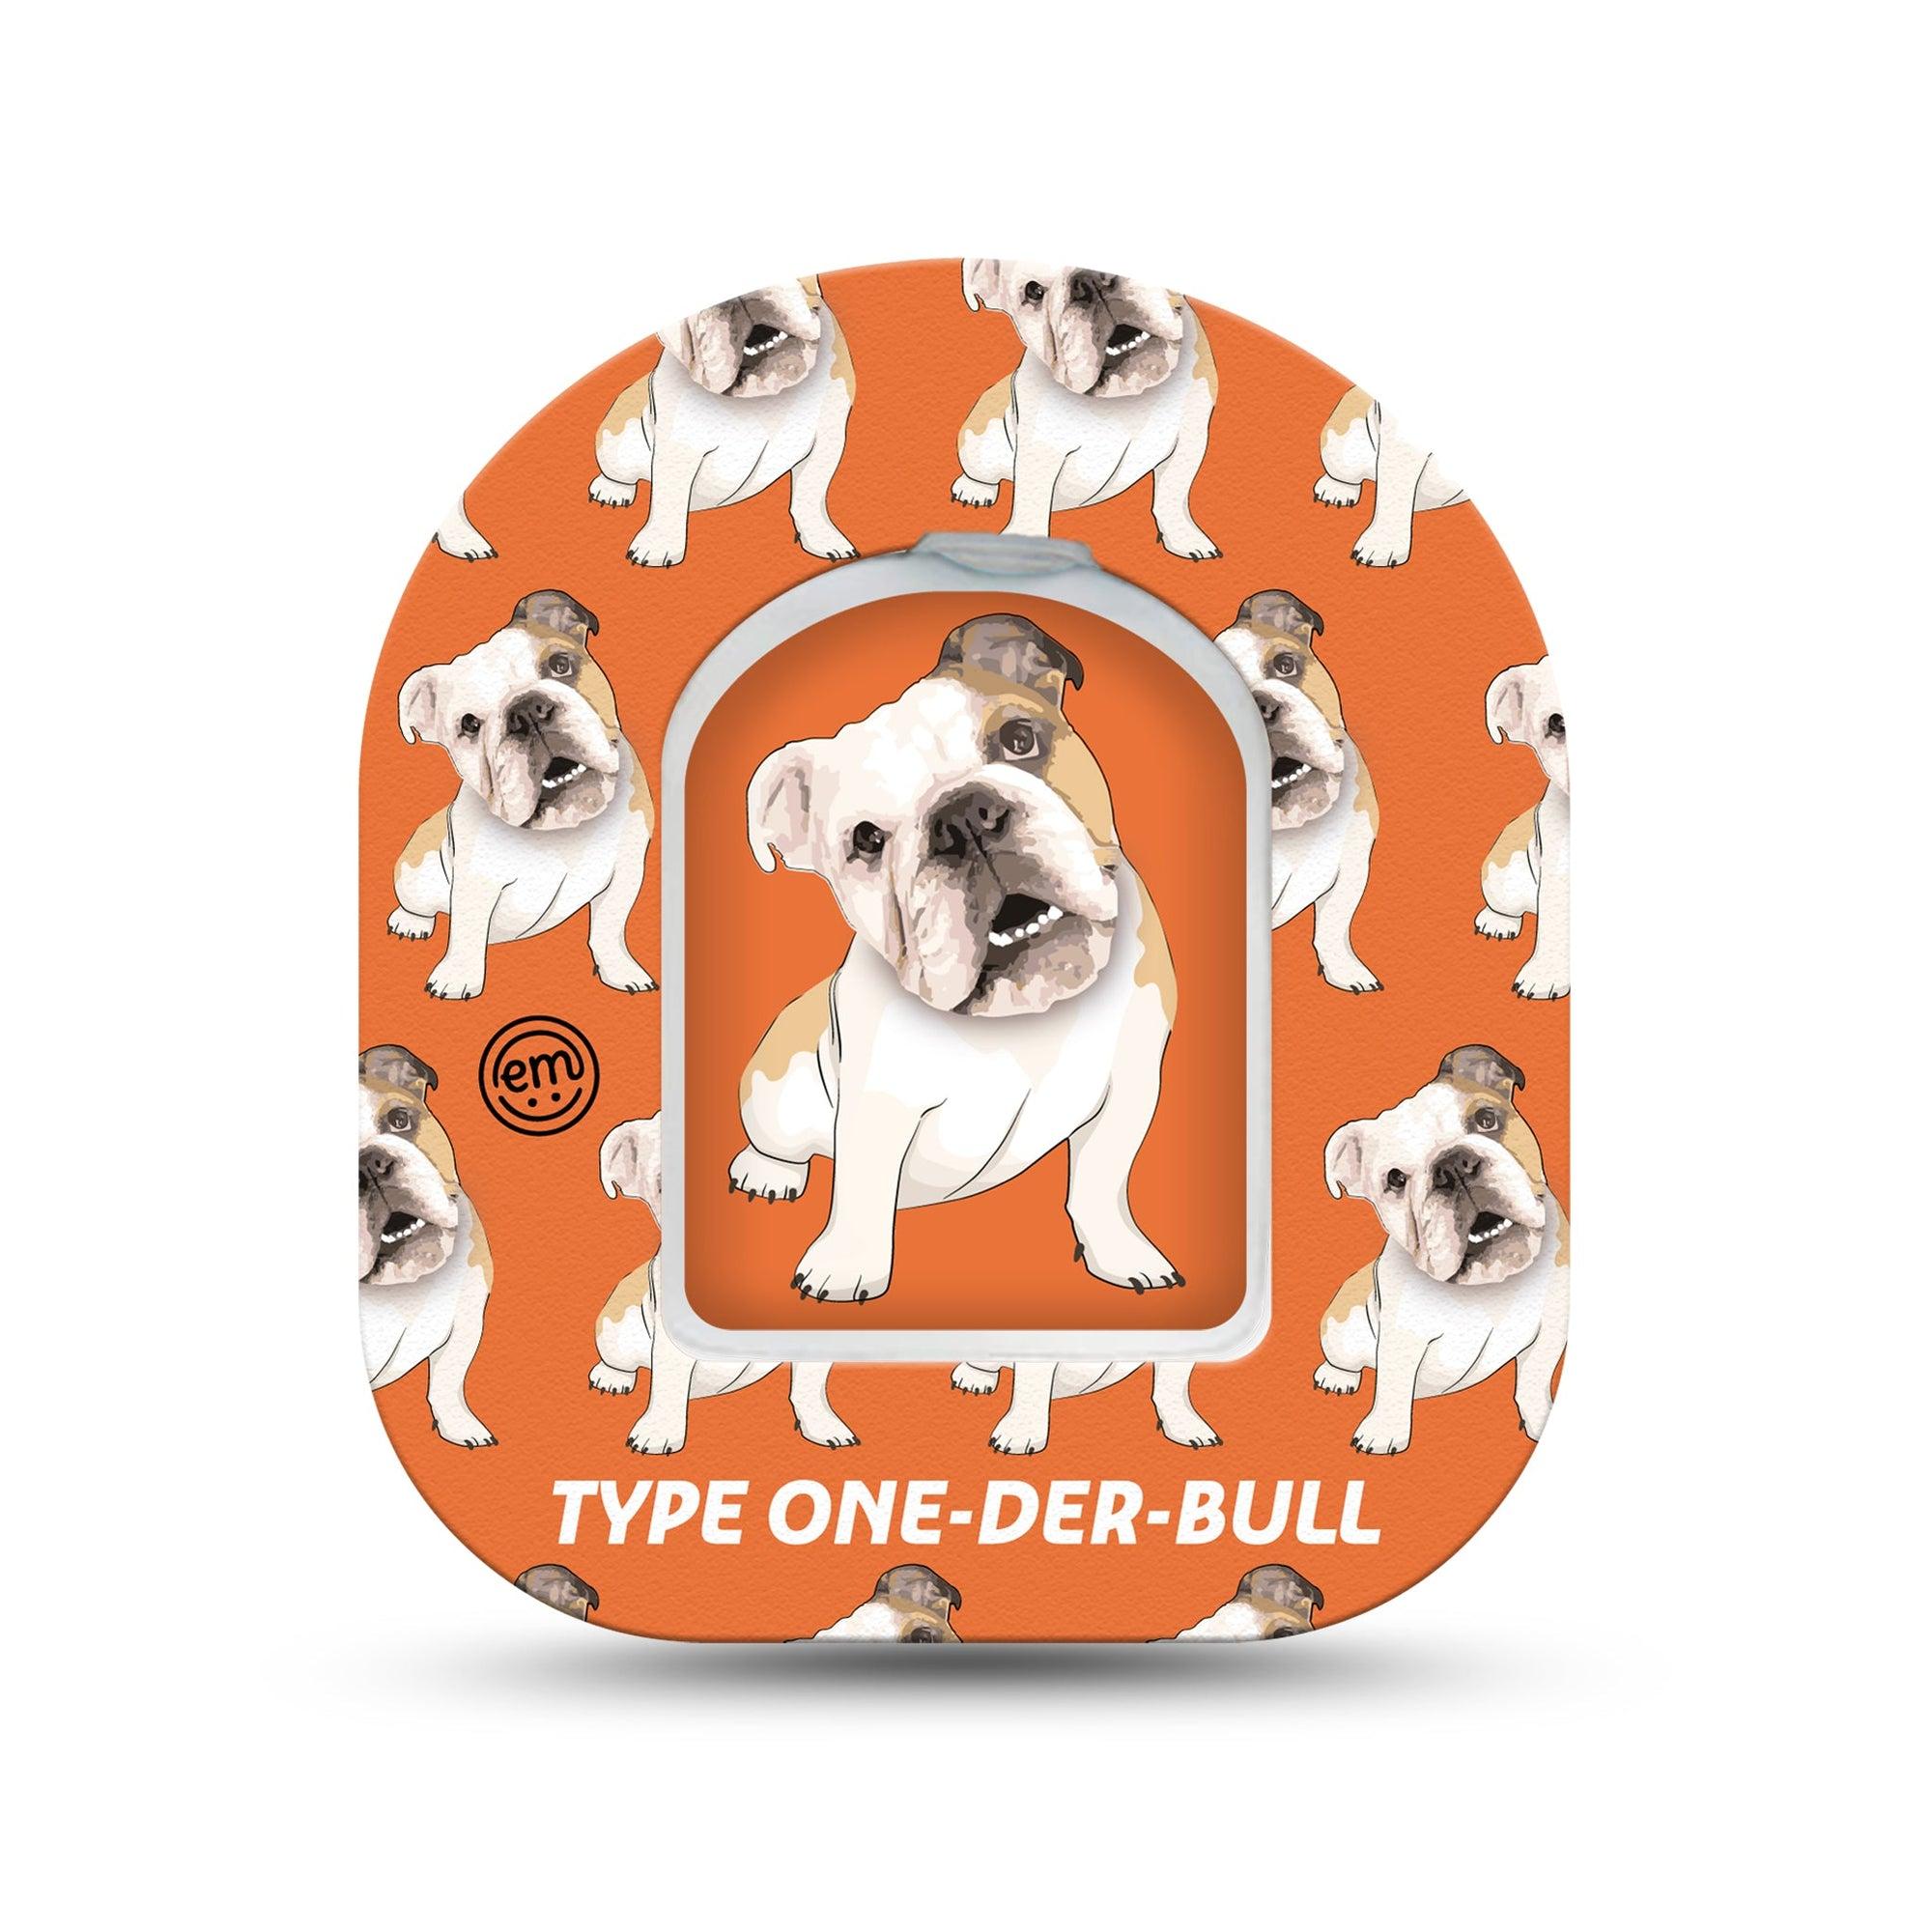 ExpressionMed Type-One-Der-Bul Omnipod Surface Center Sticker and Mini Tape Pet Animal Inspired Vinyl Sticker and Tape Design Pump Design